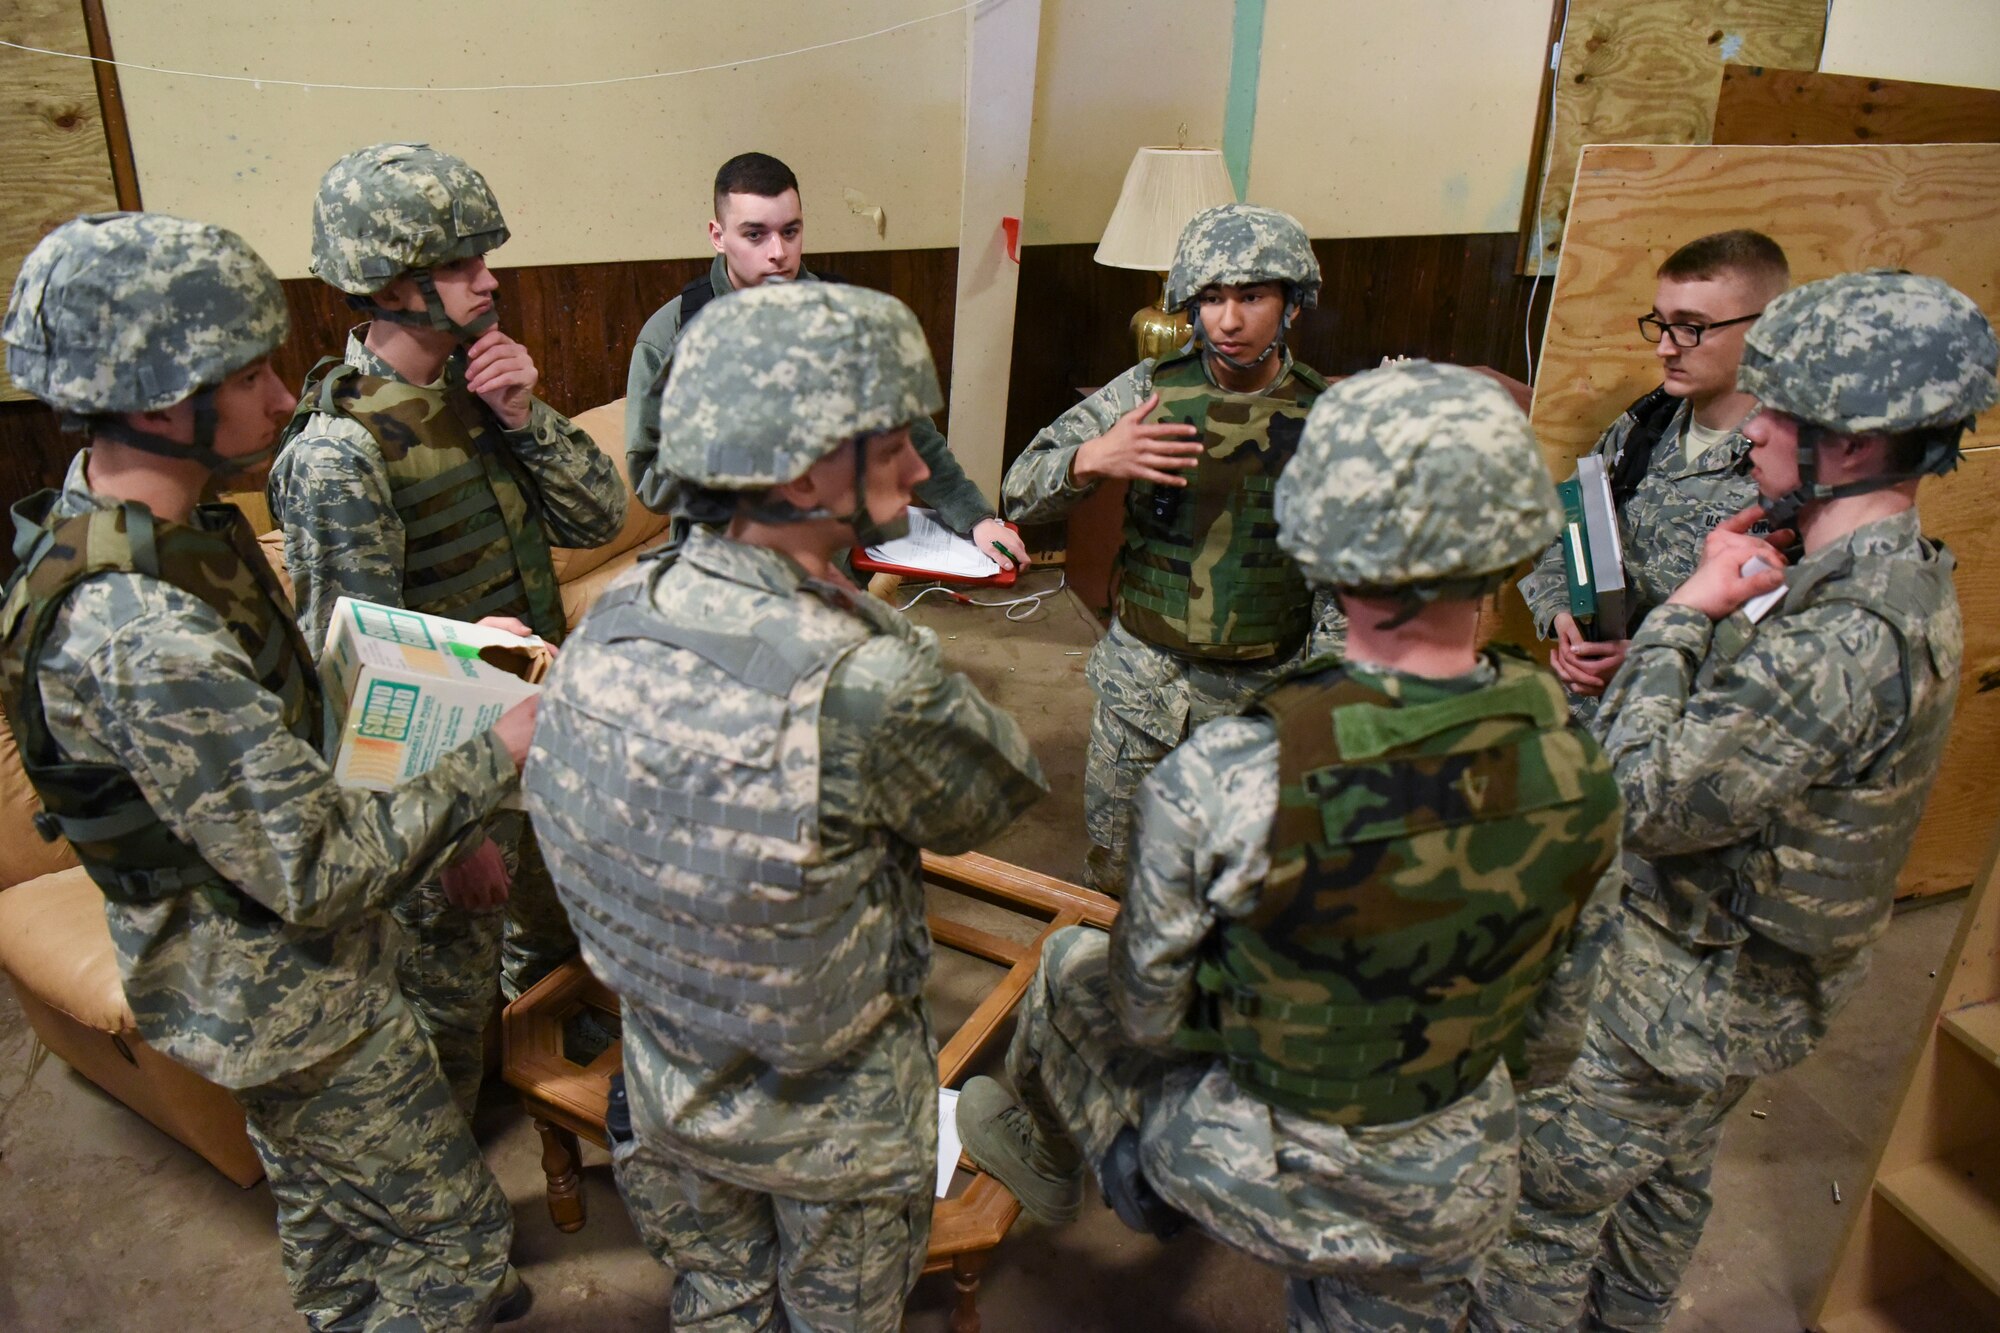 Members from the ROTC program at the University of North Dakota, participate in a readiness exercise on Grand Forks Air Force Base, N.D., April 21, 2018. The Airmen tested their leadership skills, vigilance, and ability to work together under pressure, preparing them for real life scenarios they may face upon their commission. (U.S. Air Force photo by Airman 1st Class Melody Wolff)